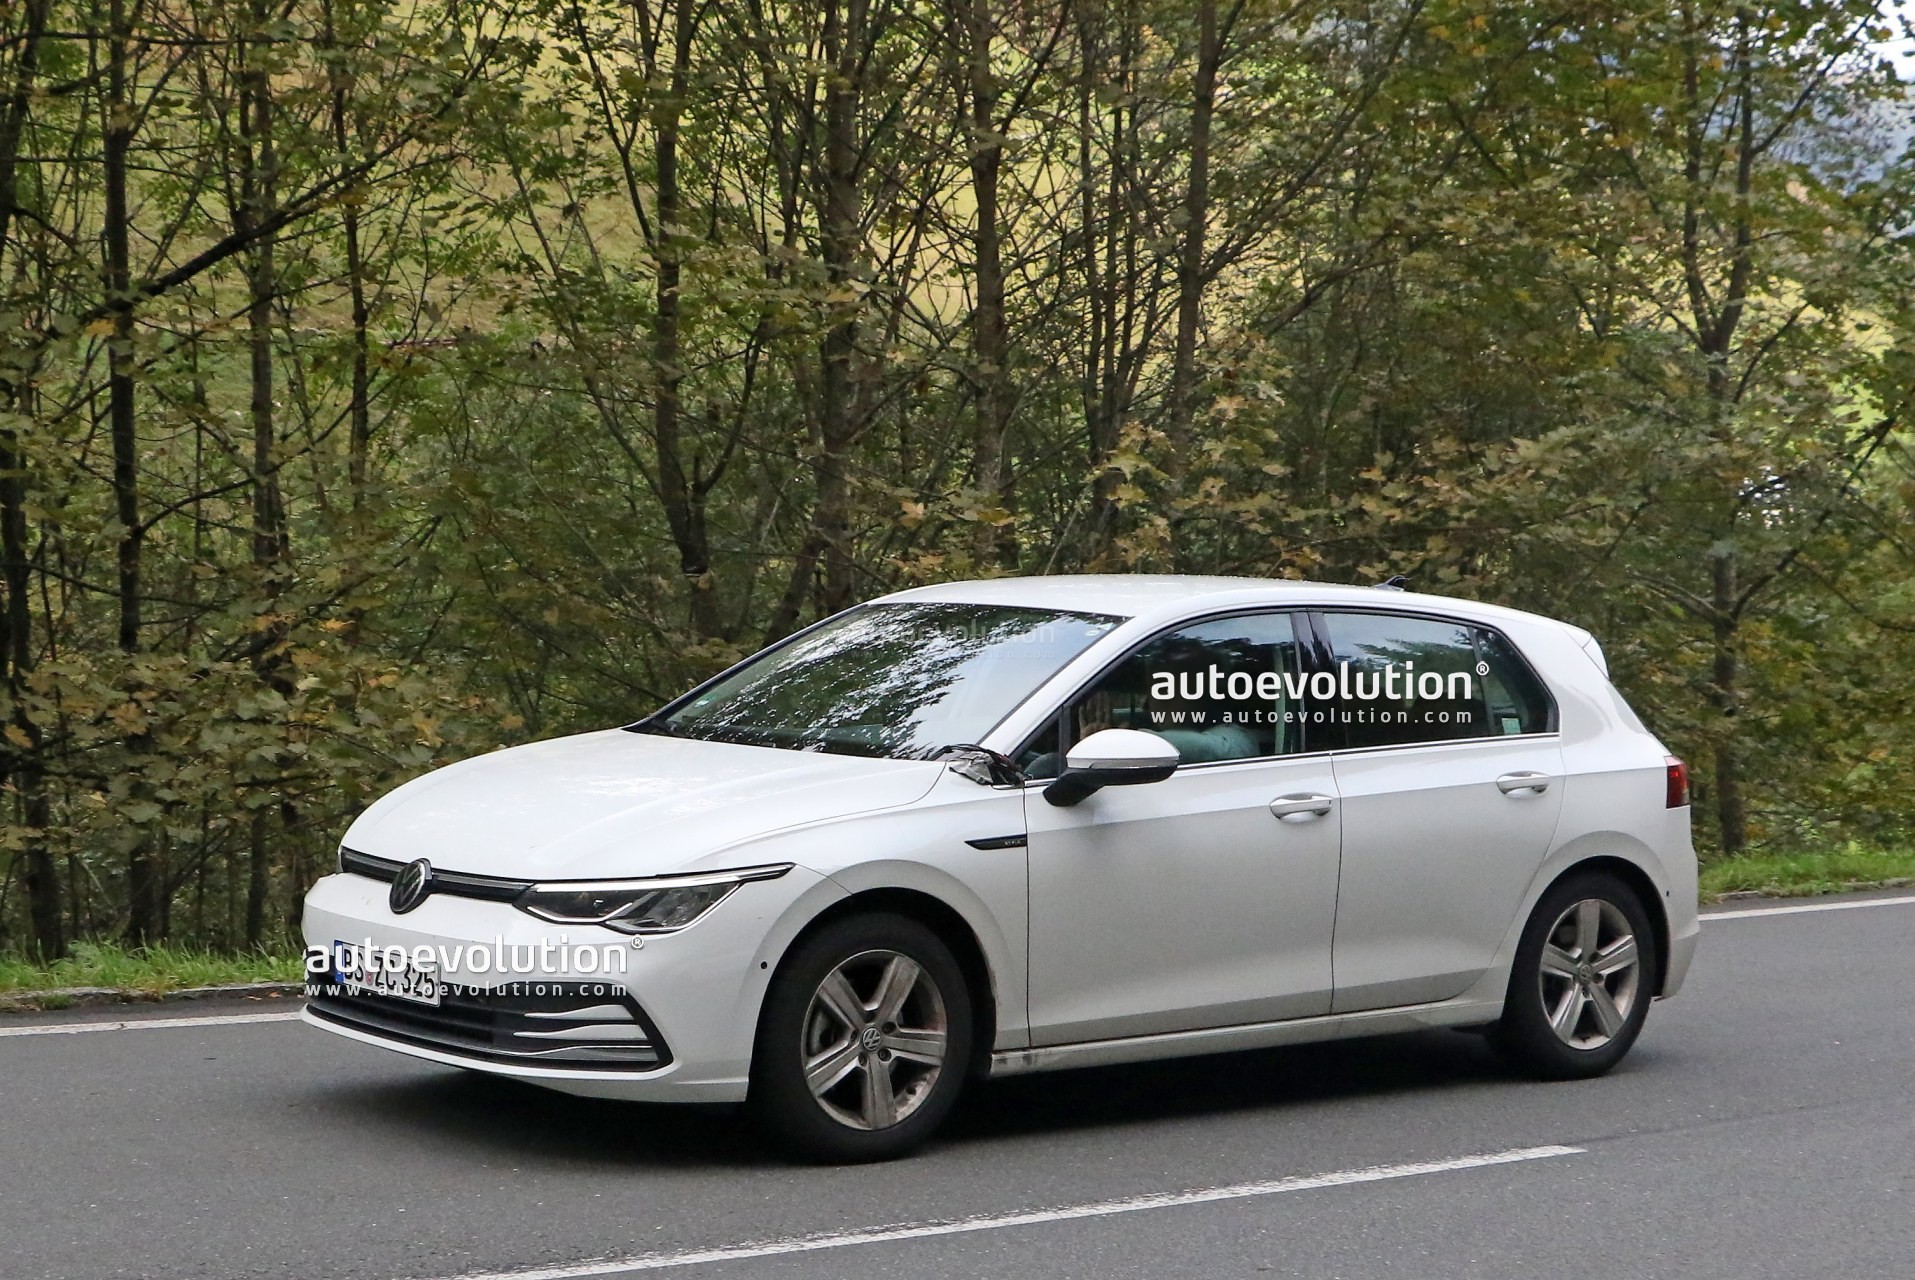 https://s1.cdn.autoevolution.com/images/news/2024-volkswagen-golf-8-facelift-spied-for-the-first-time-has-a-massive-screen-199936_1.jpg